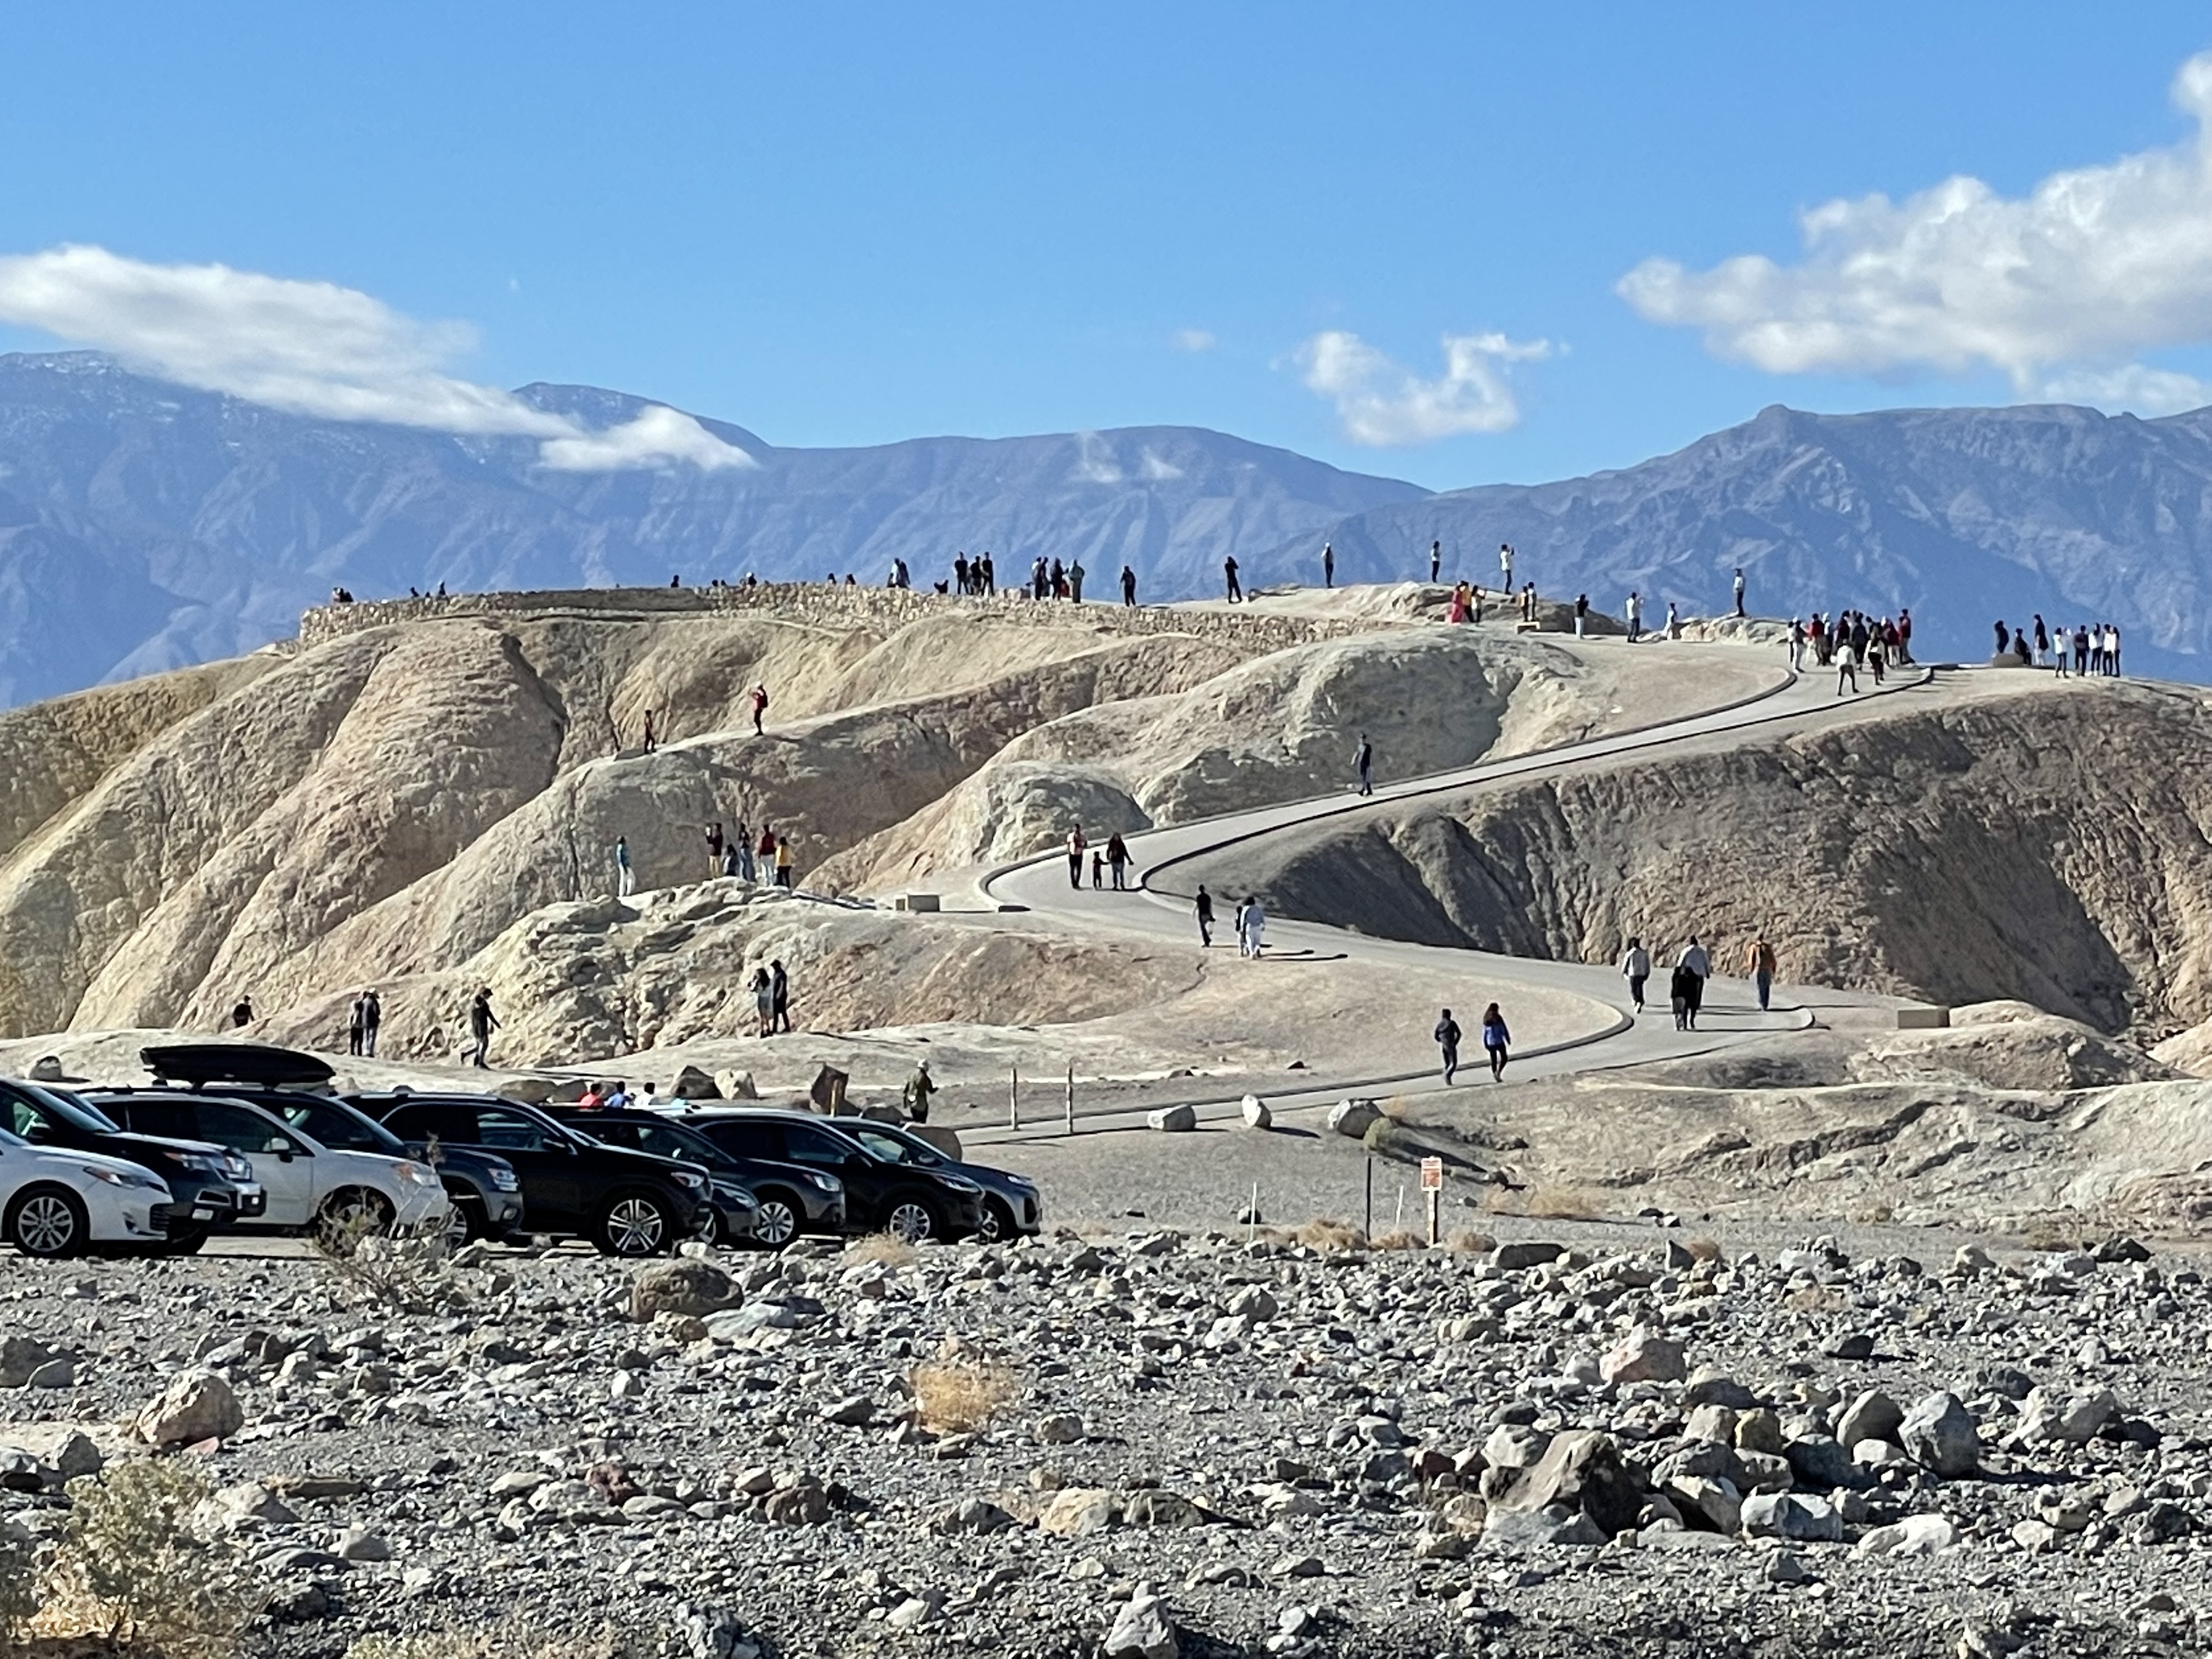 Parked cars in foreground on the left. In the middle distance people walk up a curved sidewalk on a tan-color bare hill. Dark mountains, blue skies, and a few clouds are in the distance.